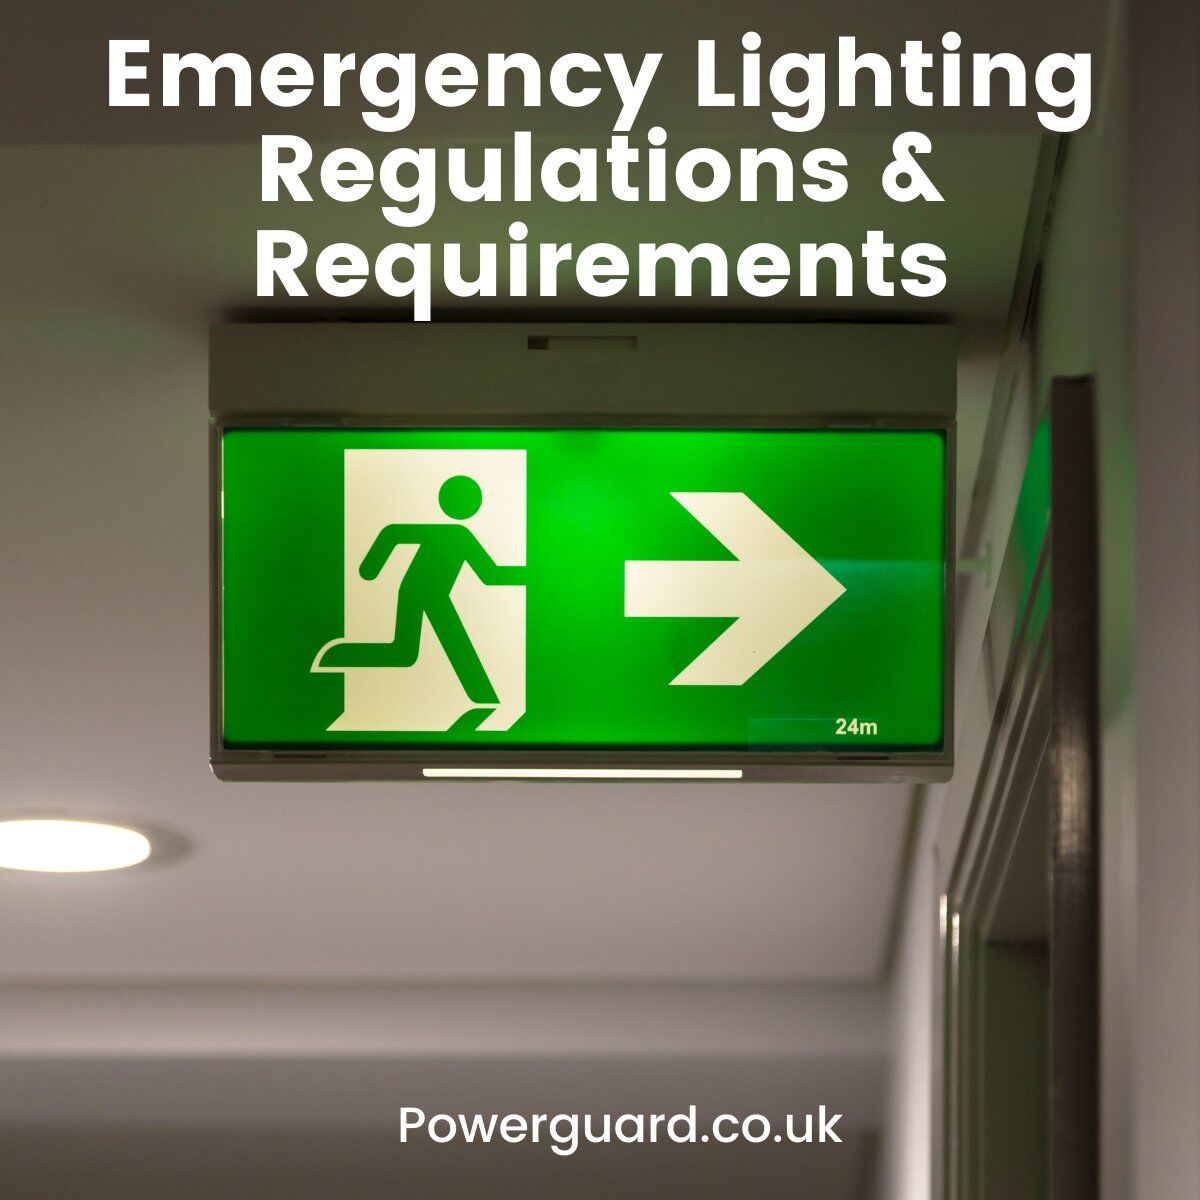 The objective of #emergencylighting is to make sure that a light source illuminates, automatically and for a suitable time frame, when the mains #powersupply is unable to function as normal

Find out more about emergency lighting regulations in our blog: 

bit.ly/44FUqrw